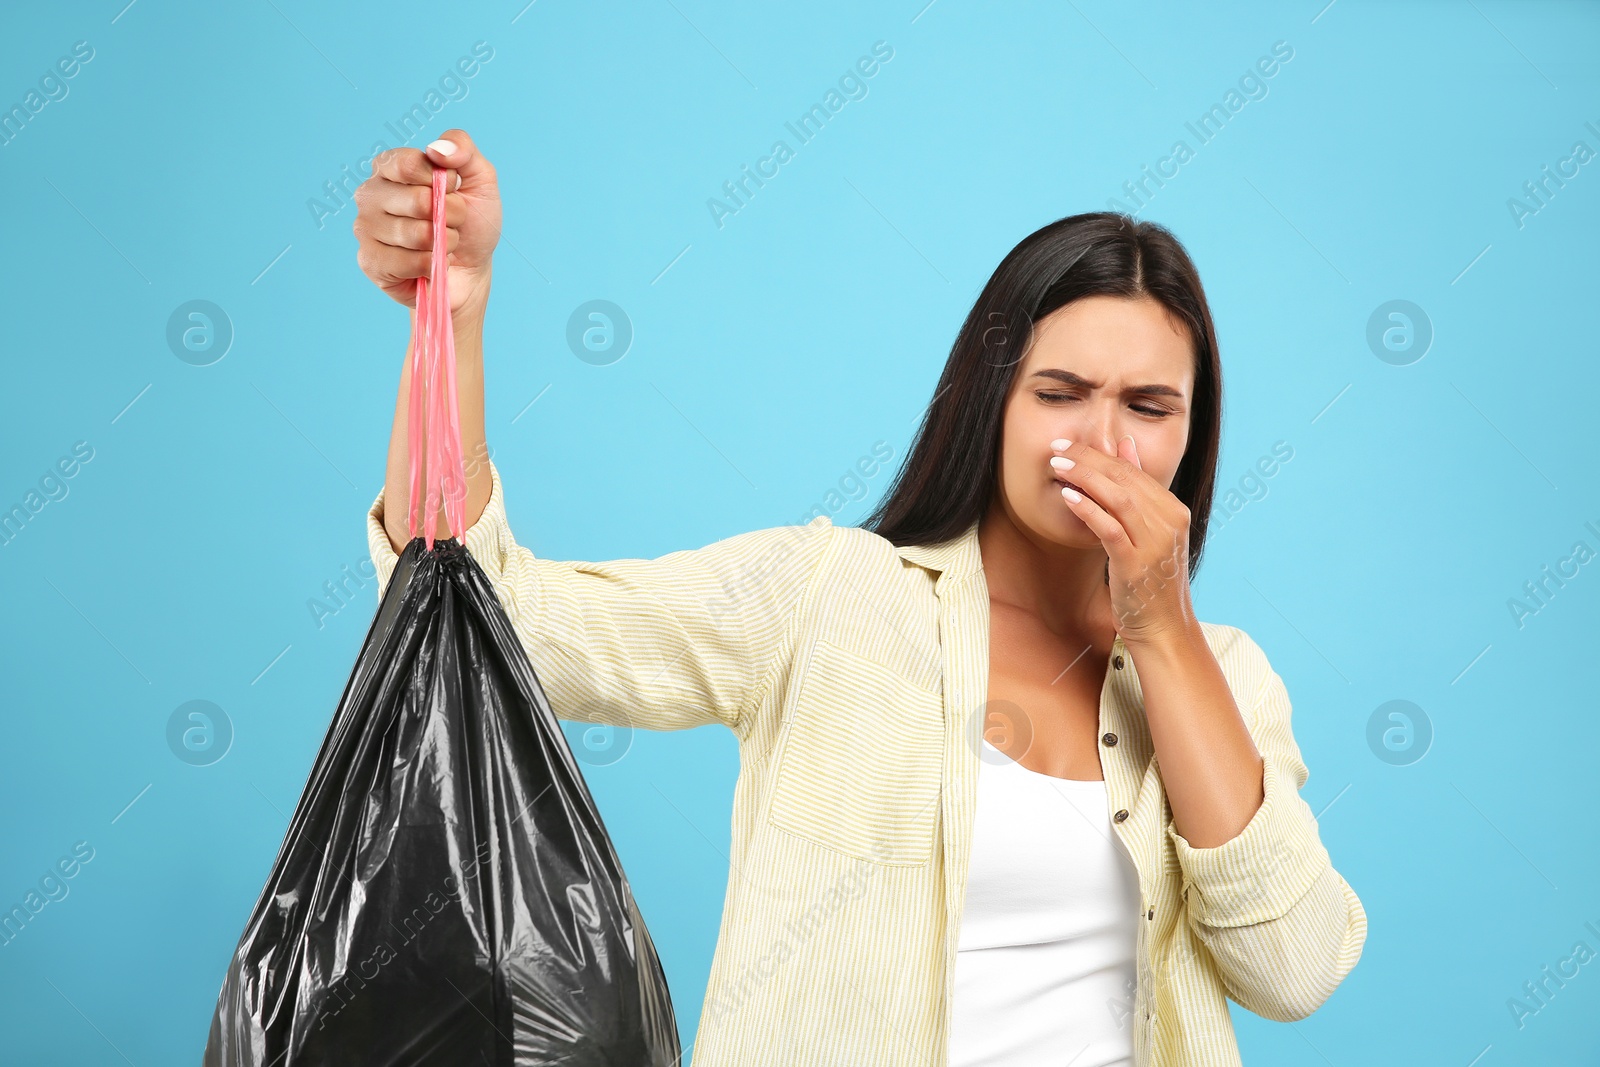 Photo of Woman holding full garbage bag on light blue background